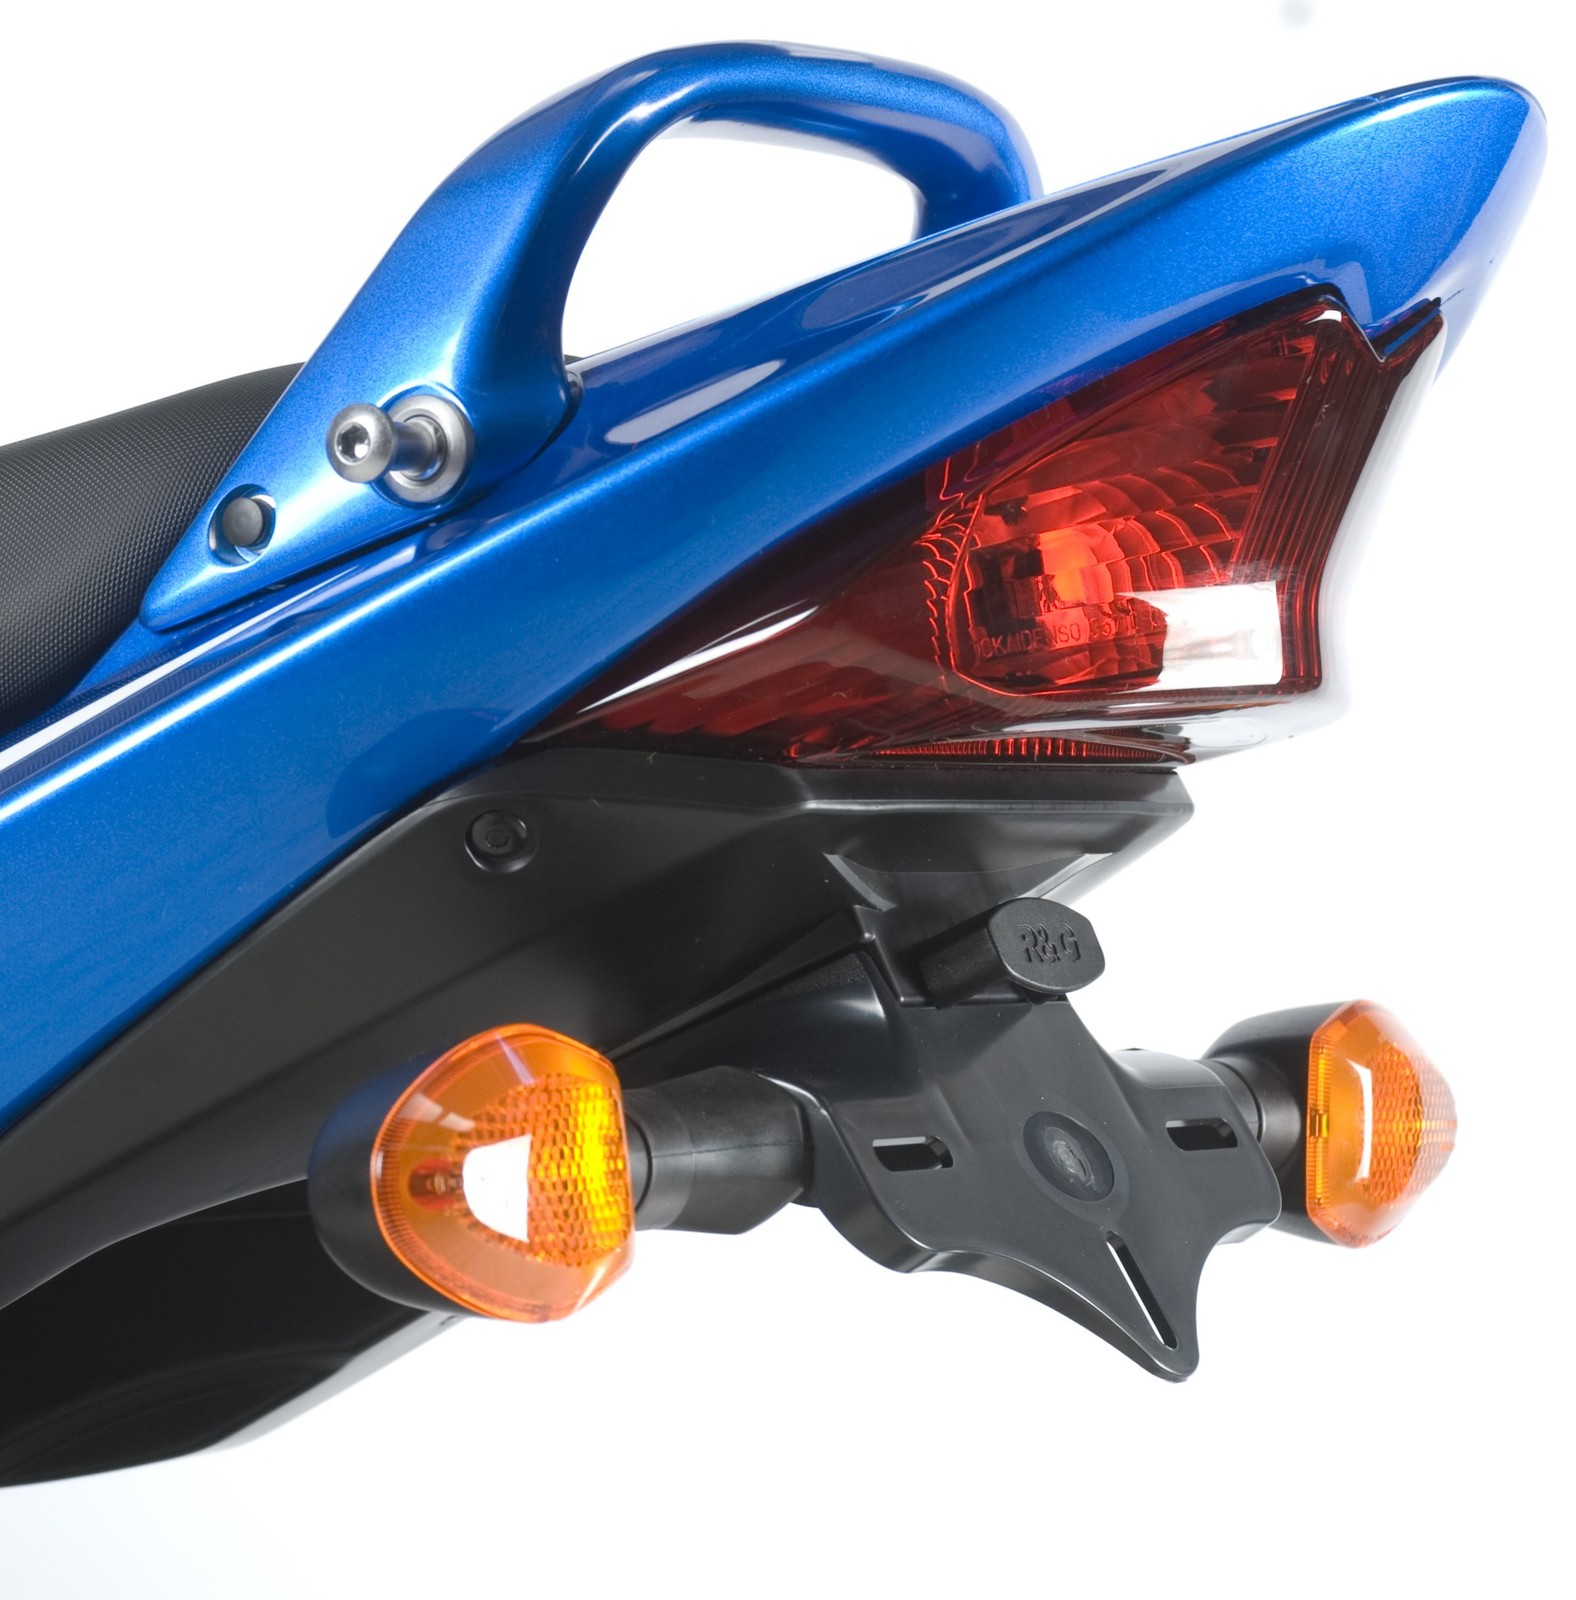 R&G Racing Tail Tidy For Suzuki Bandit 650/1250 Models